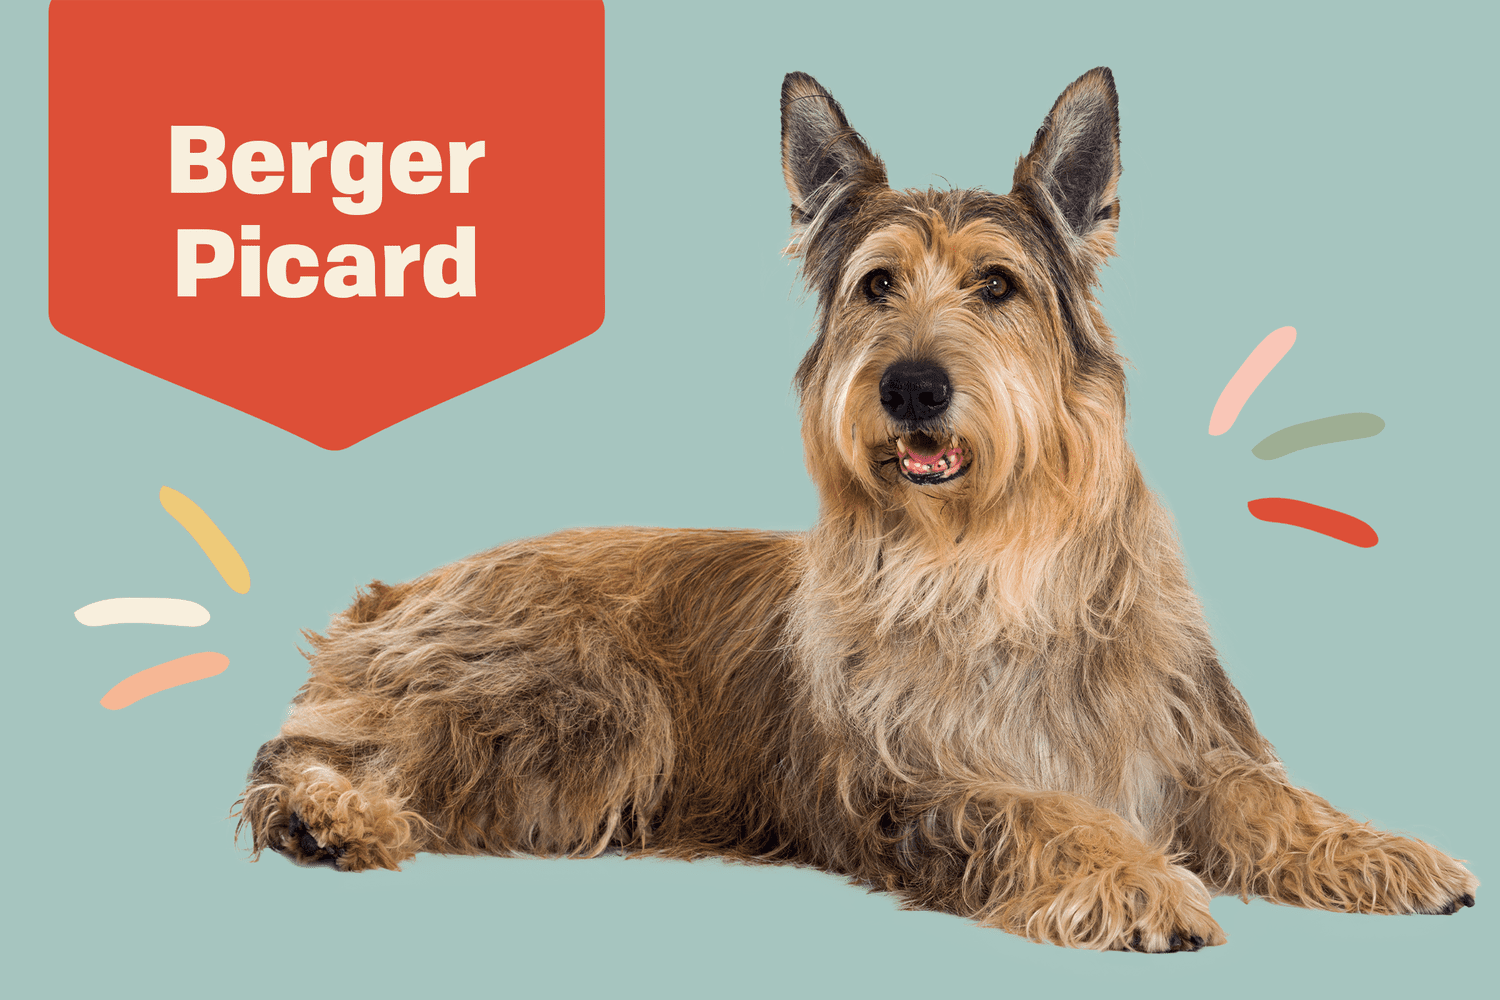 Berger Picard dog breed profile treatment